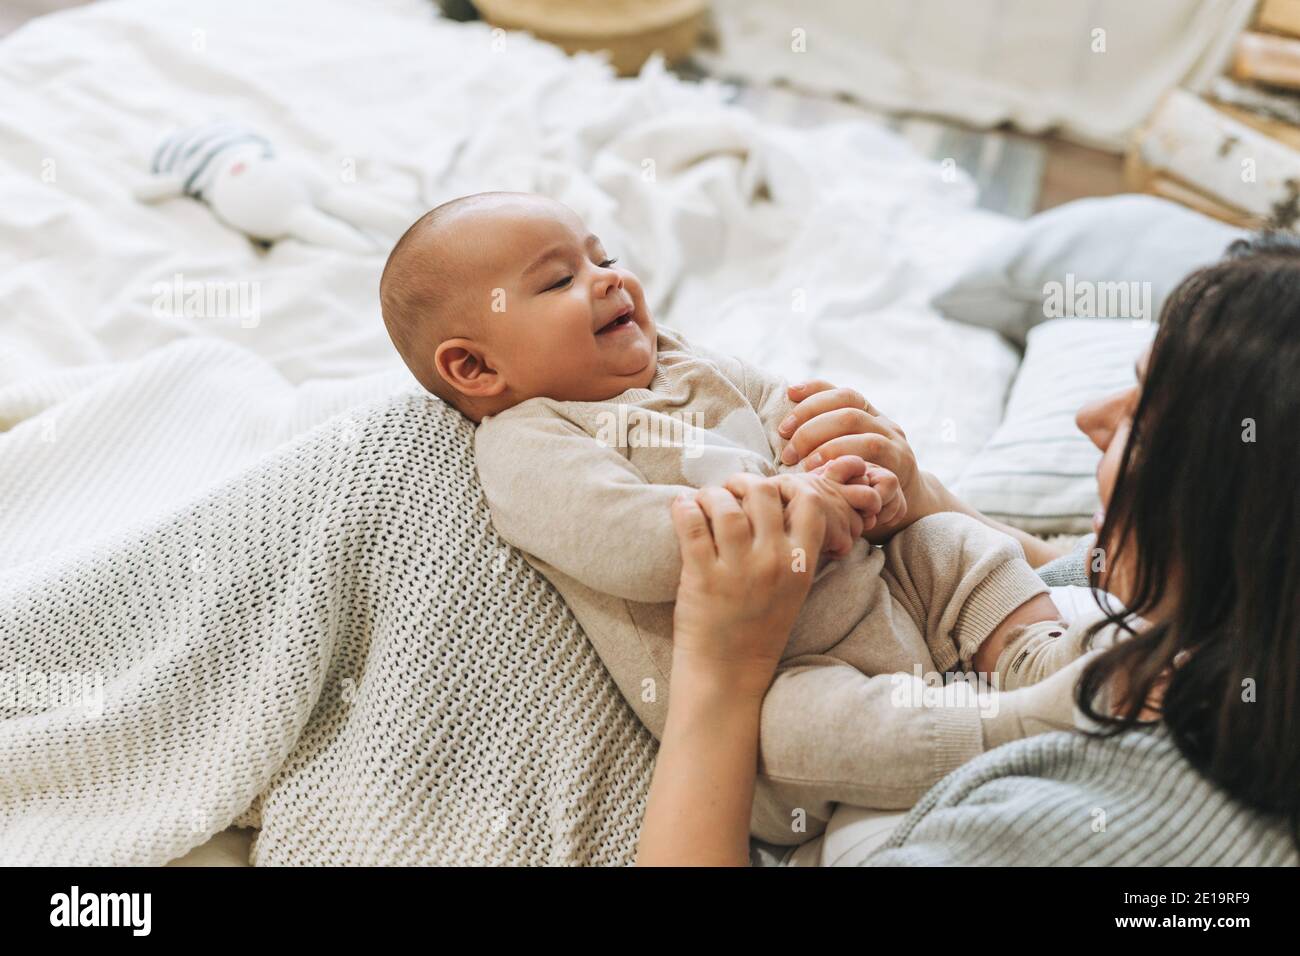 Young mother having fun with cute baby boy on bed, natural tones ...